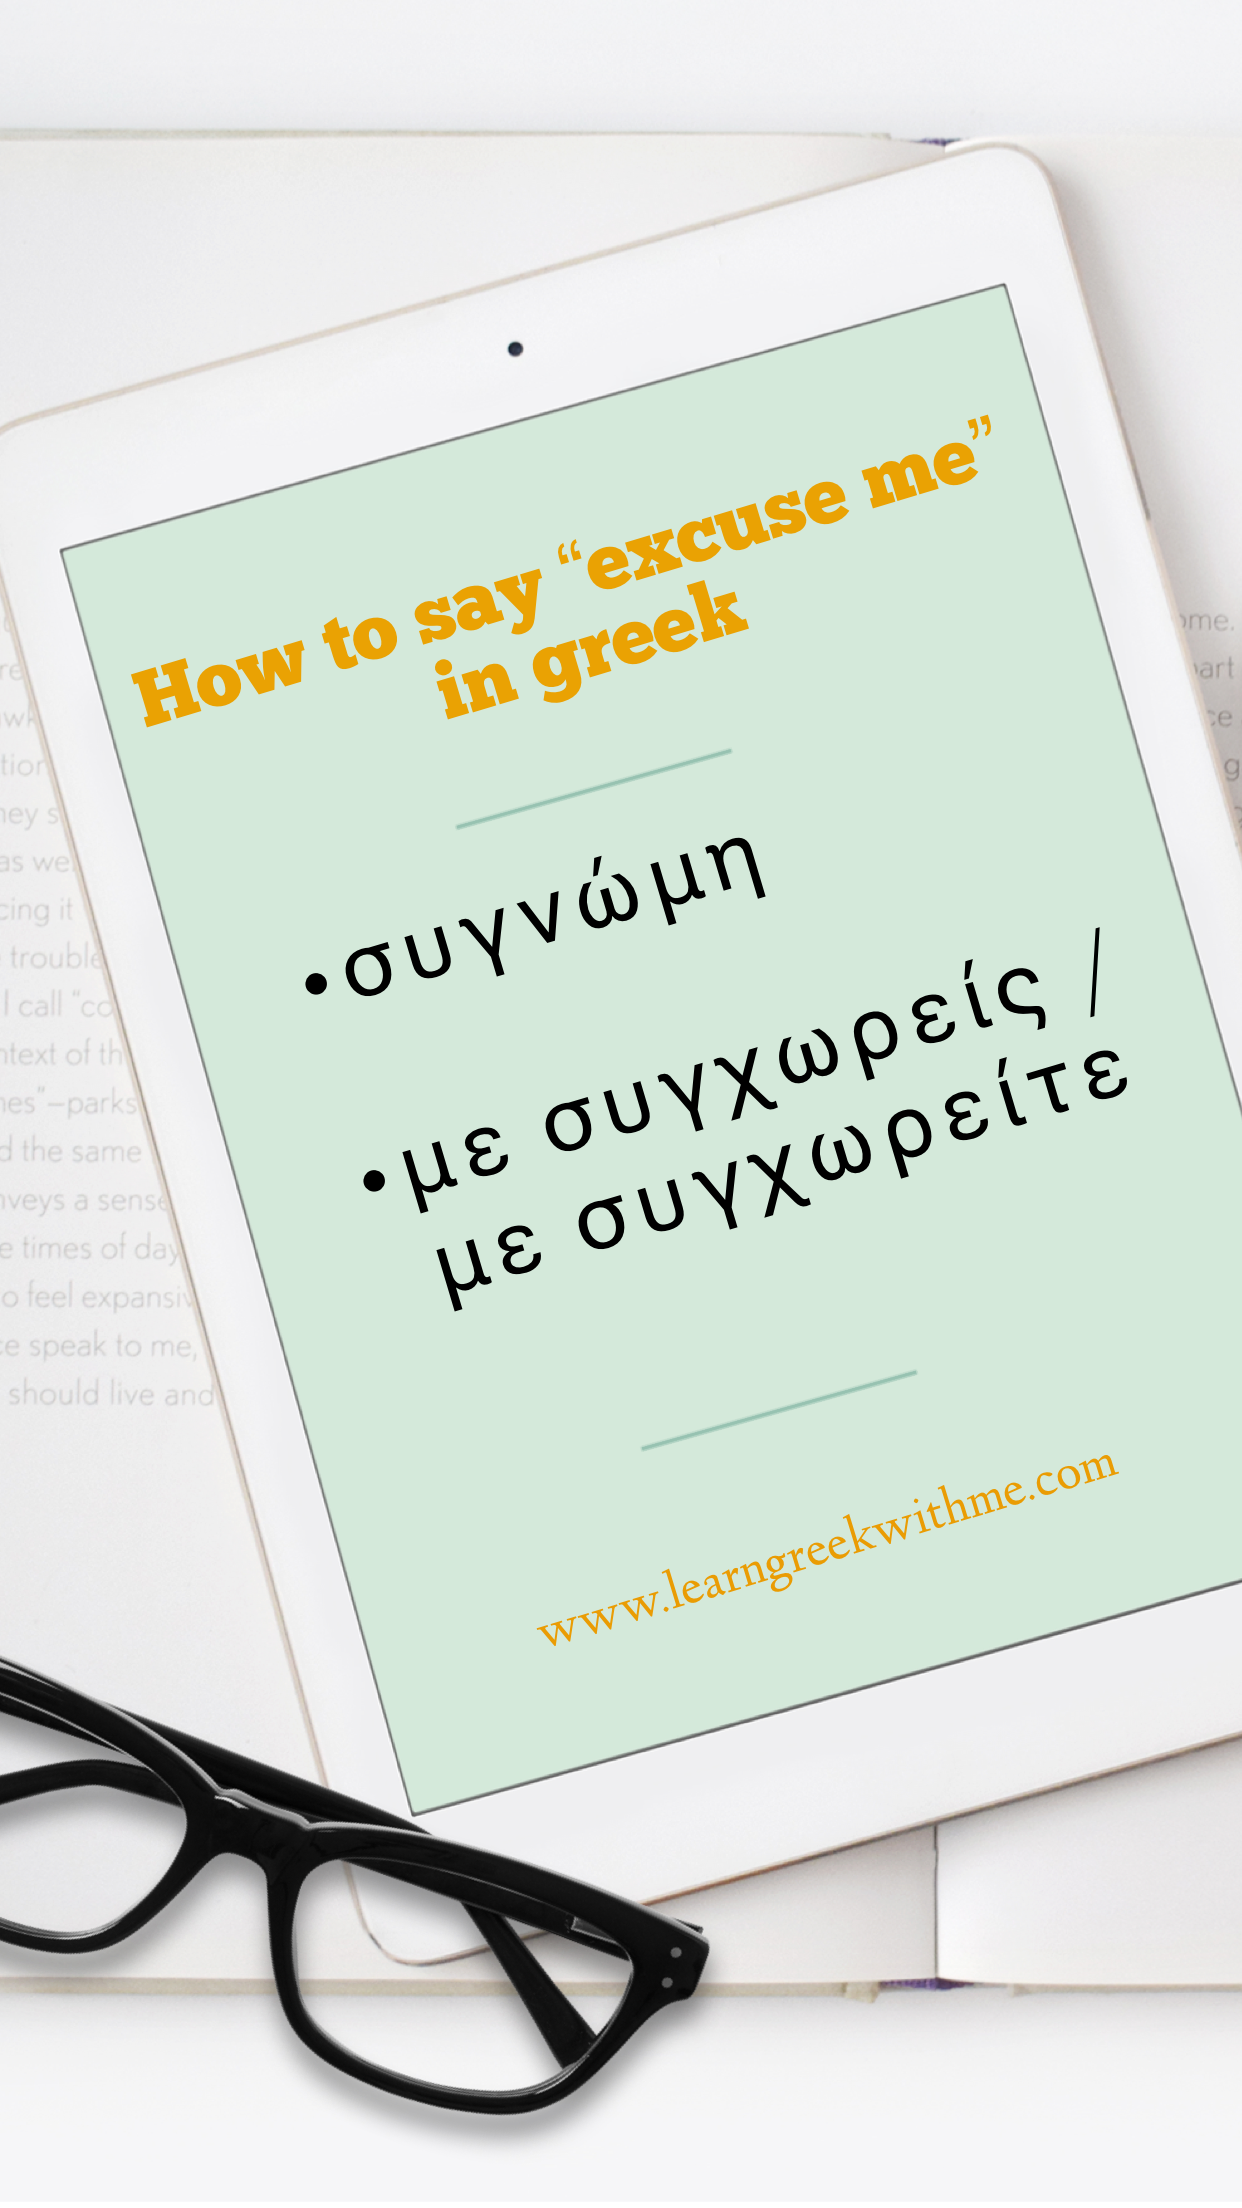 How to say “excuse me” in Greek